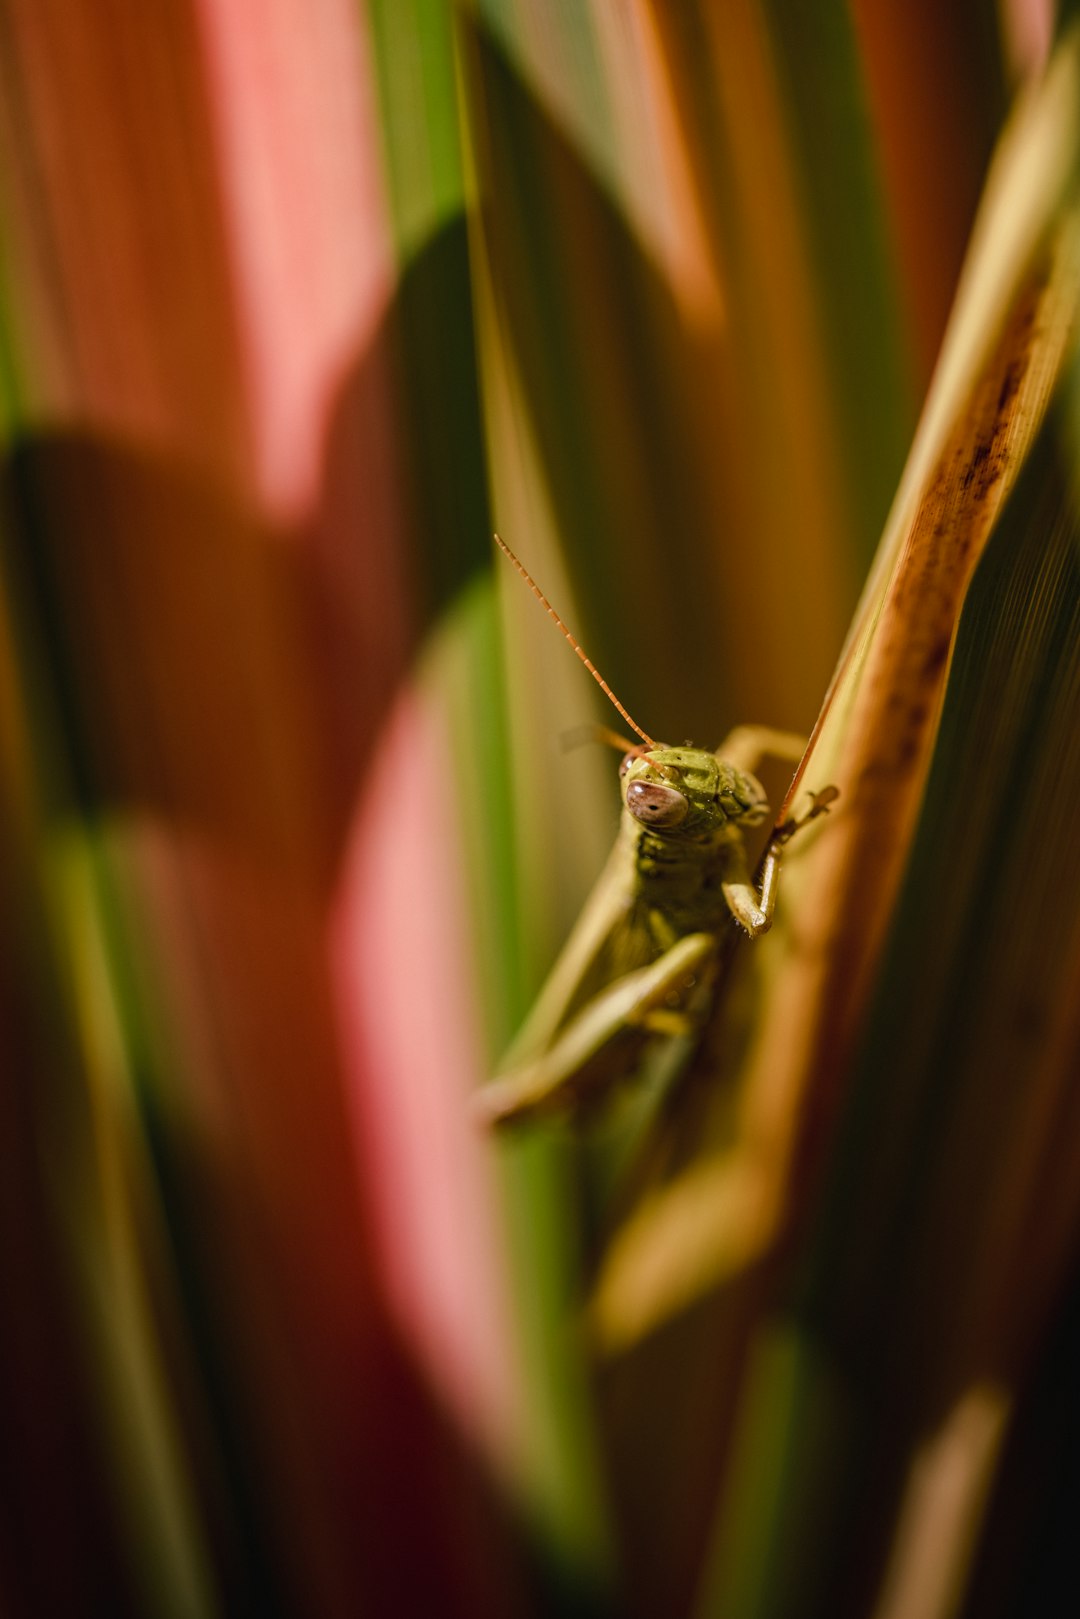 green grasshopper perched on brown stem in close up photography during daytime